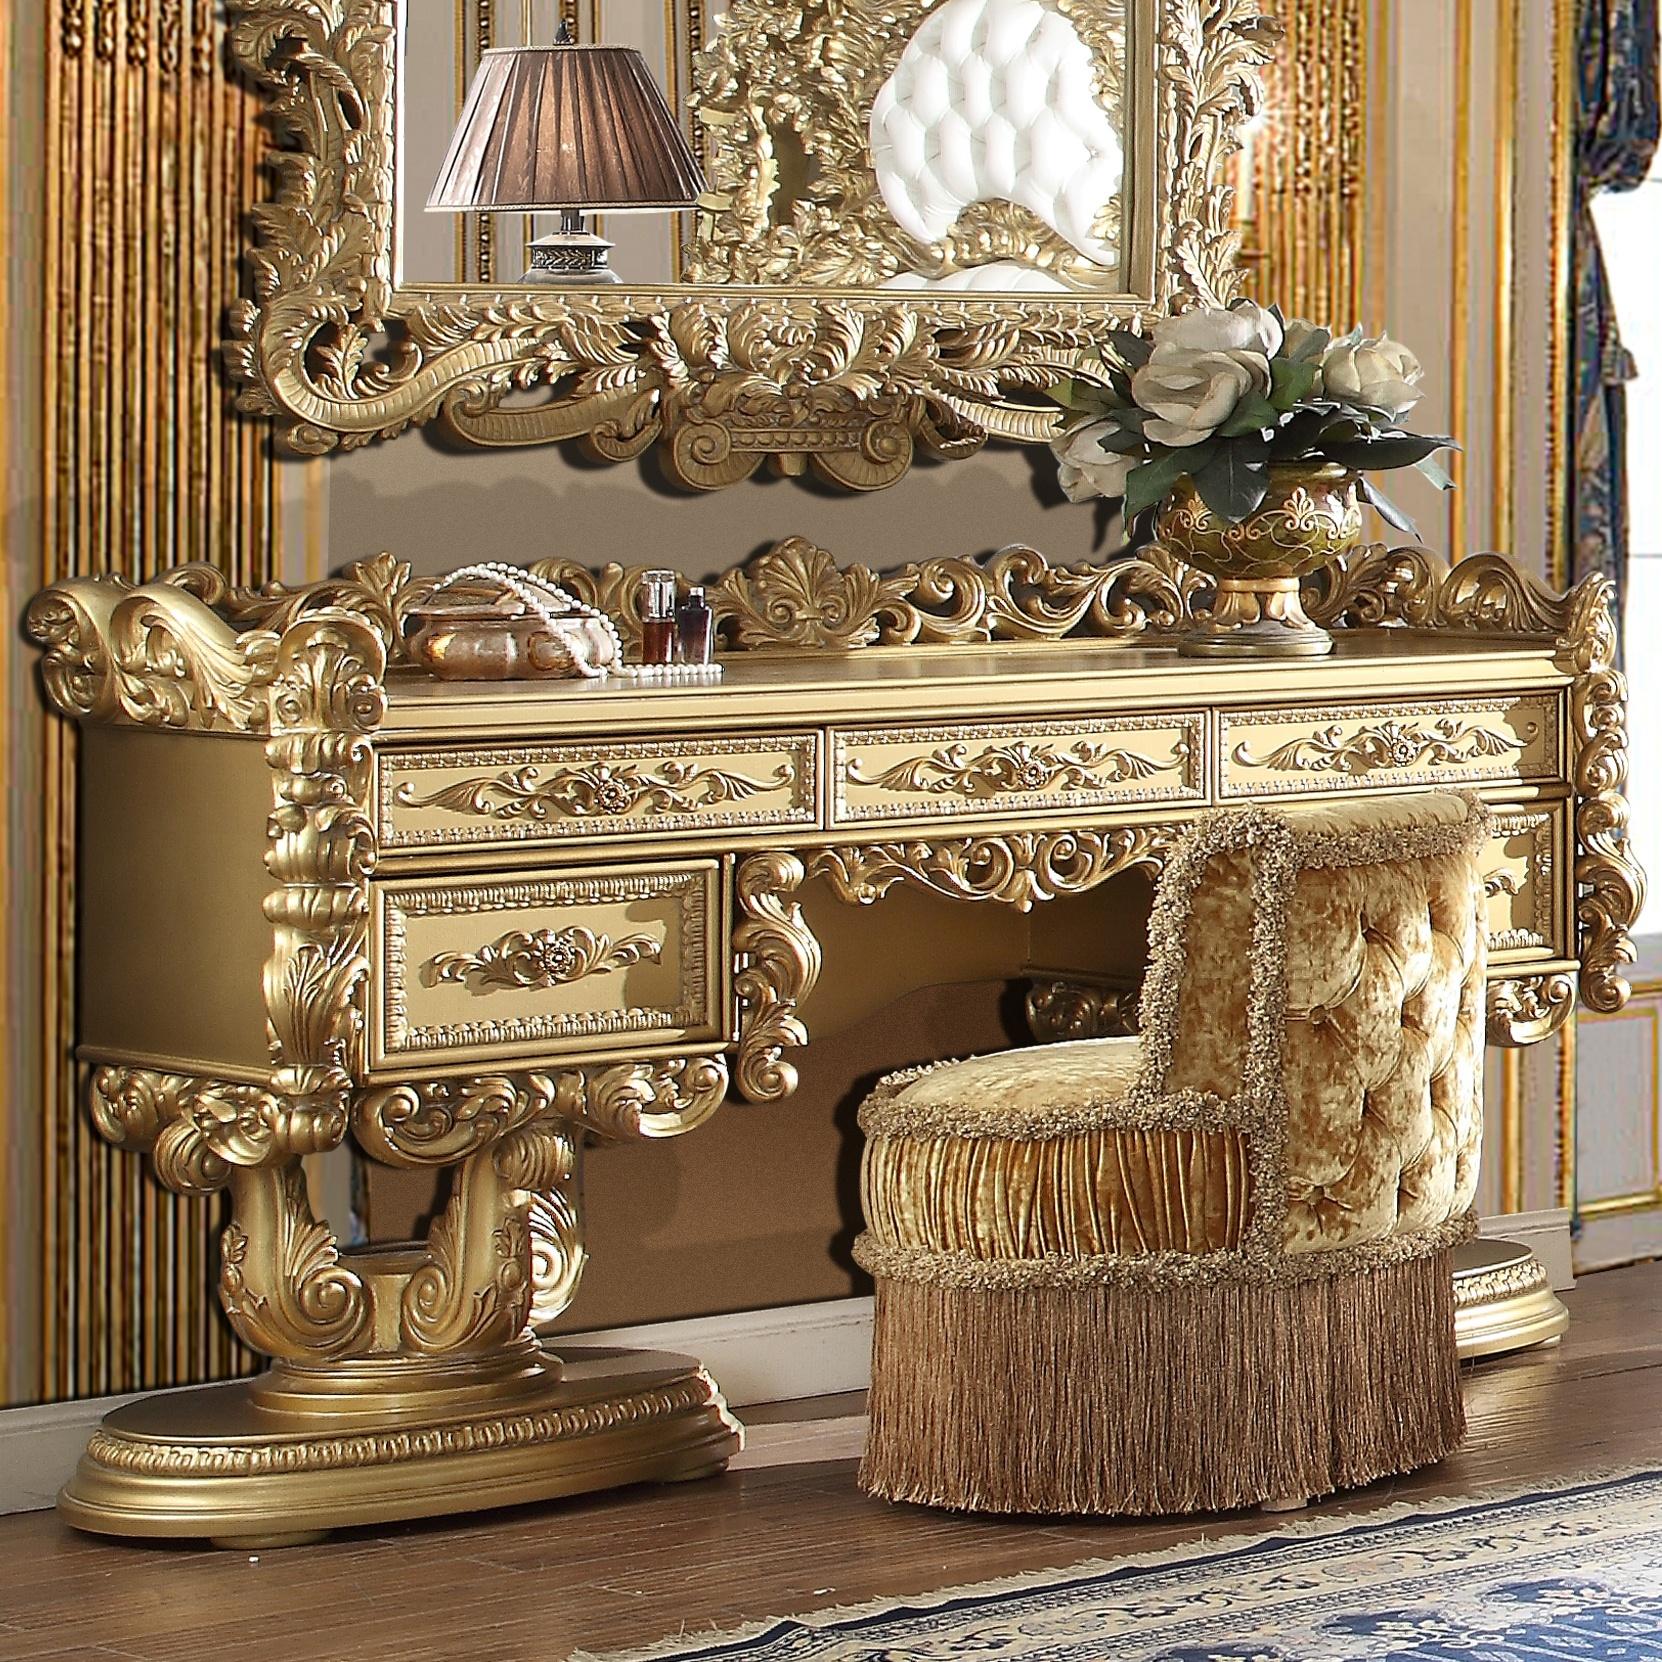 

    
Baroque Rich Gold Vanity Dresser Carved Wood Traditional Homey Design HD-8086
